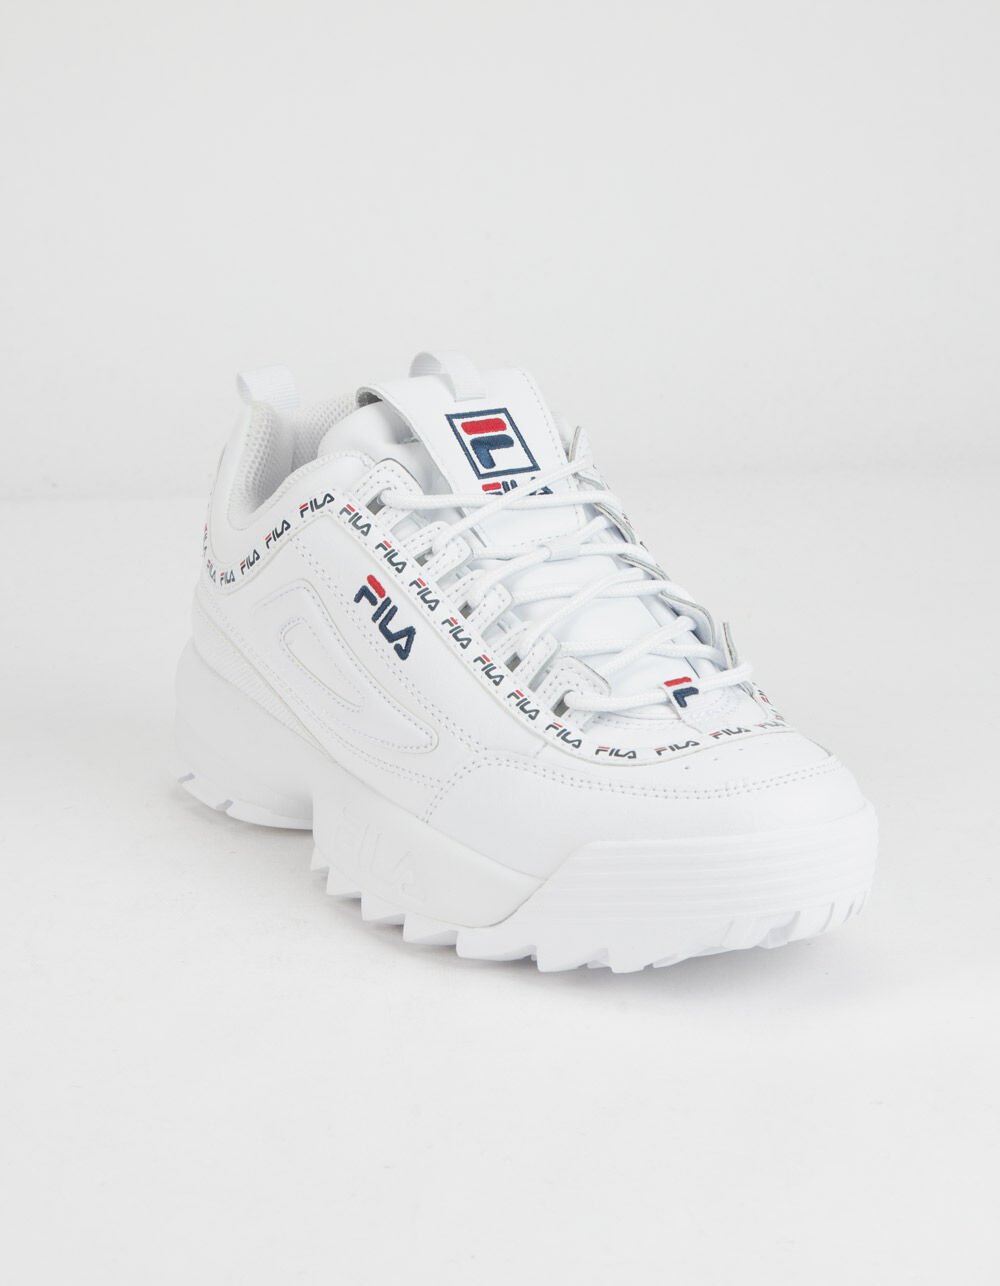 FILA Disruptor 2 Repeat Girls Shoes - WHITE | Tillys